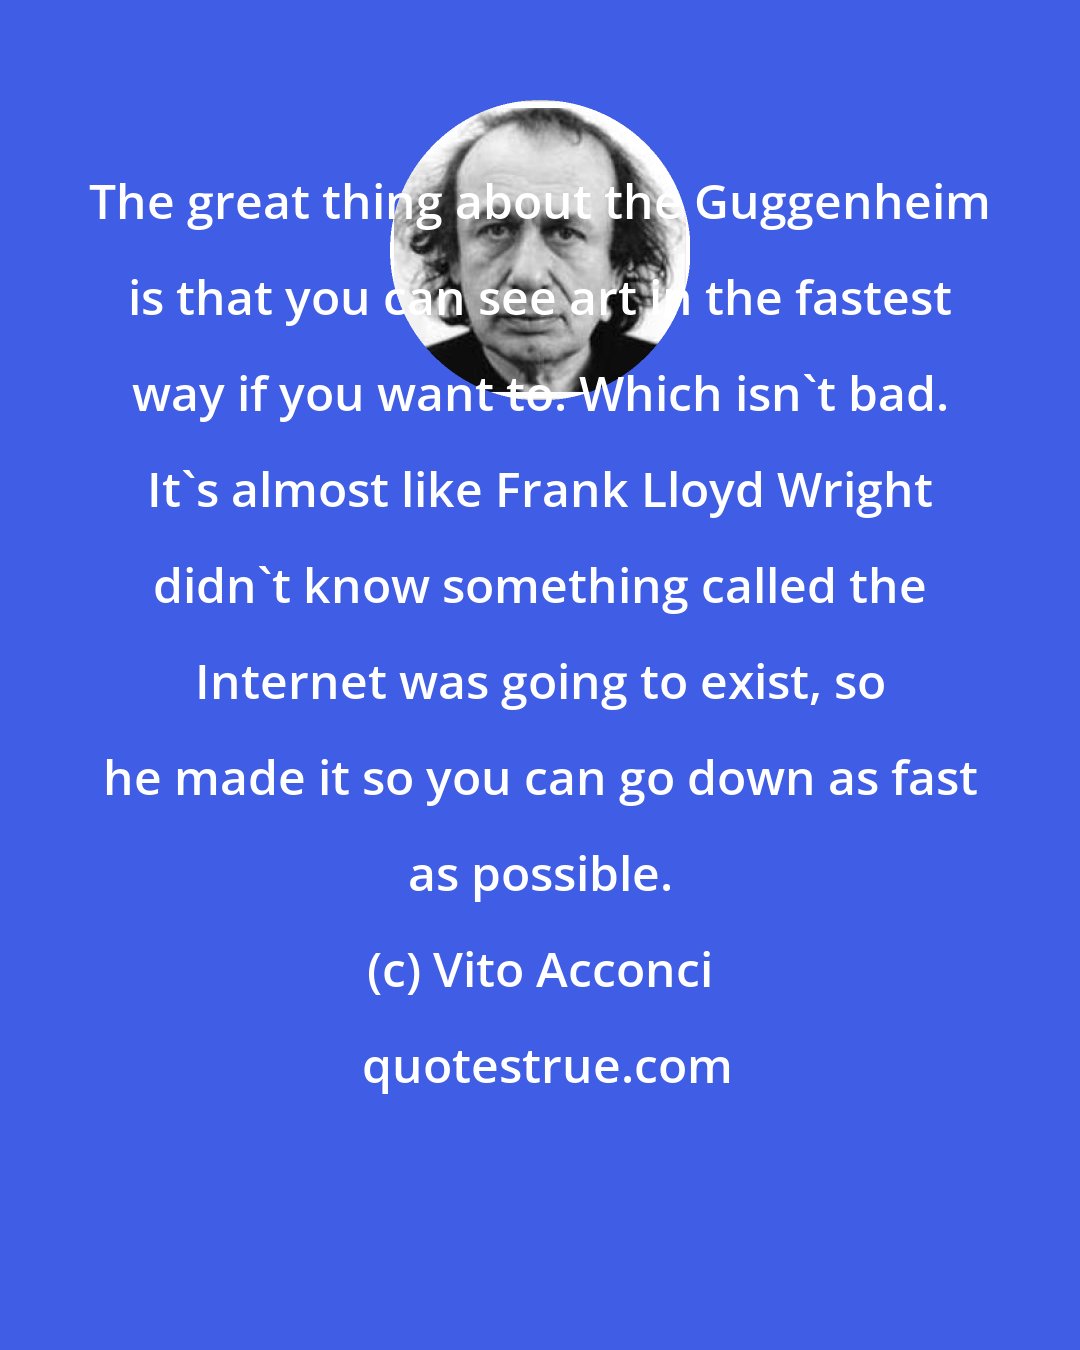 Vito Acconci: The great thing about the Guggenheim is that you can see art in the fastest way if you want to. Which isn't bad. It's almost like Frank Lloyd Wright didn't know something called the Internet was going to exist, so he made it so you can go down as fast as possible.